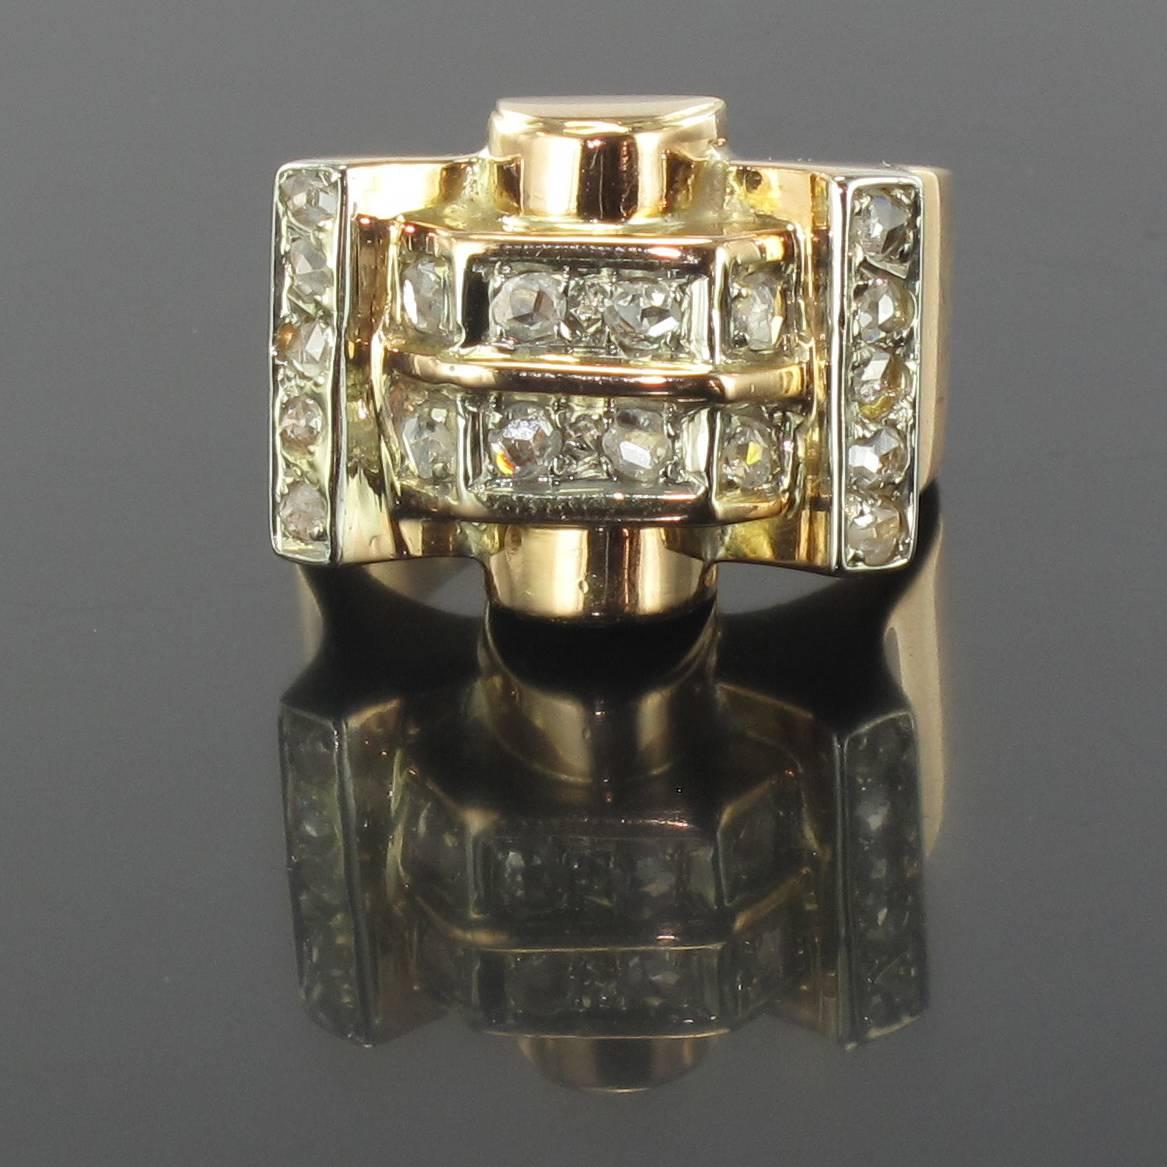 Ring in 18 carat yellow gold, eagle head hallmark. 

This splendid tank ring, or bridge ring, displays a raised section with geometric lines set with rose cut diamonds. At the underlying centre is a gold half cylinder shape. 

Total diamond